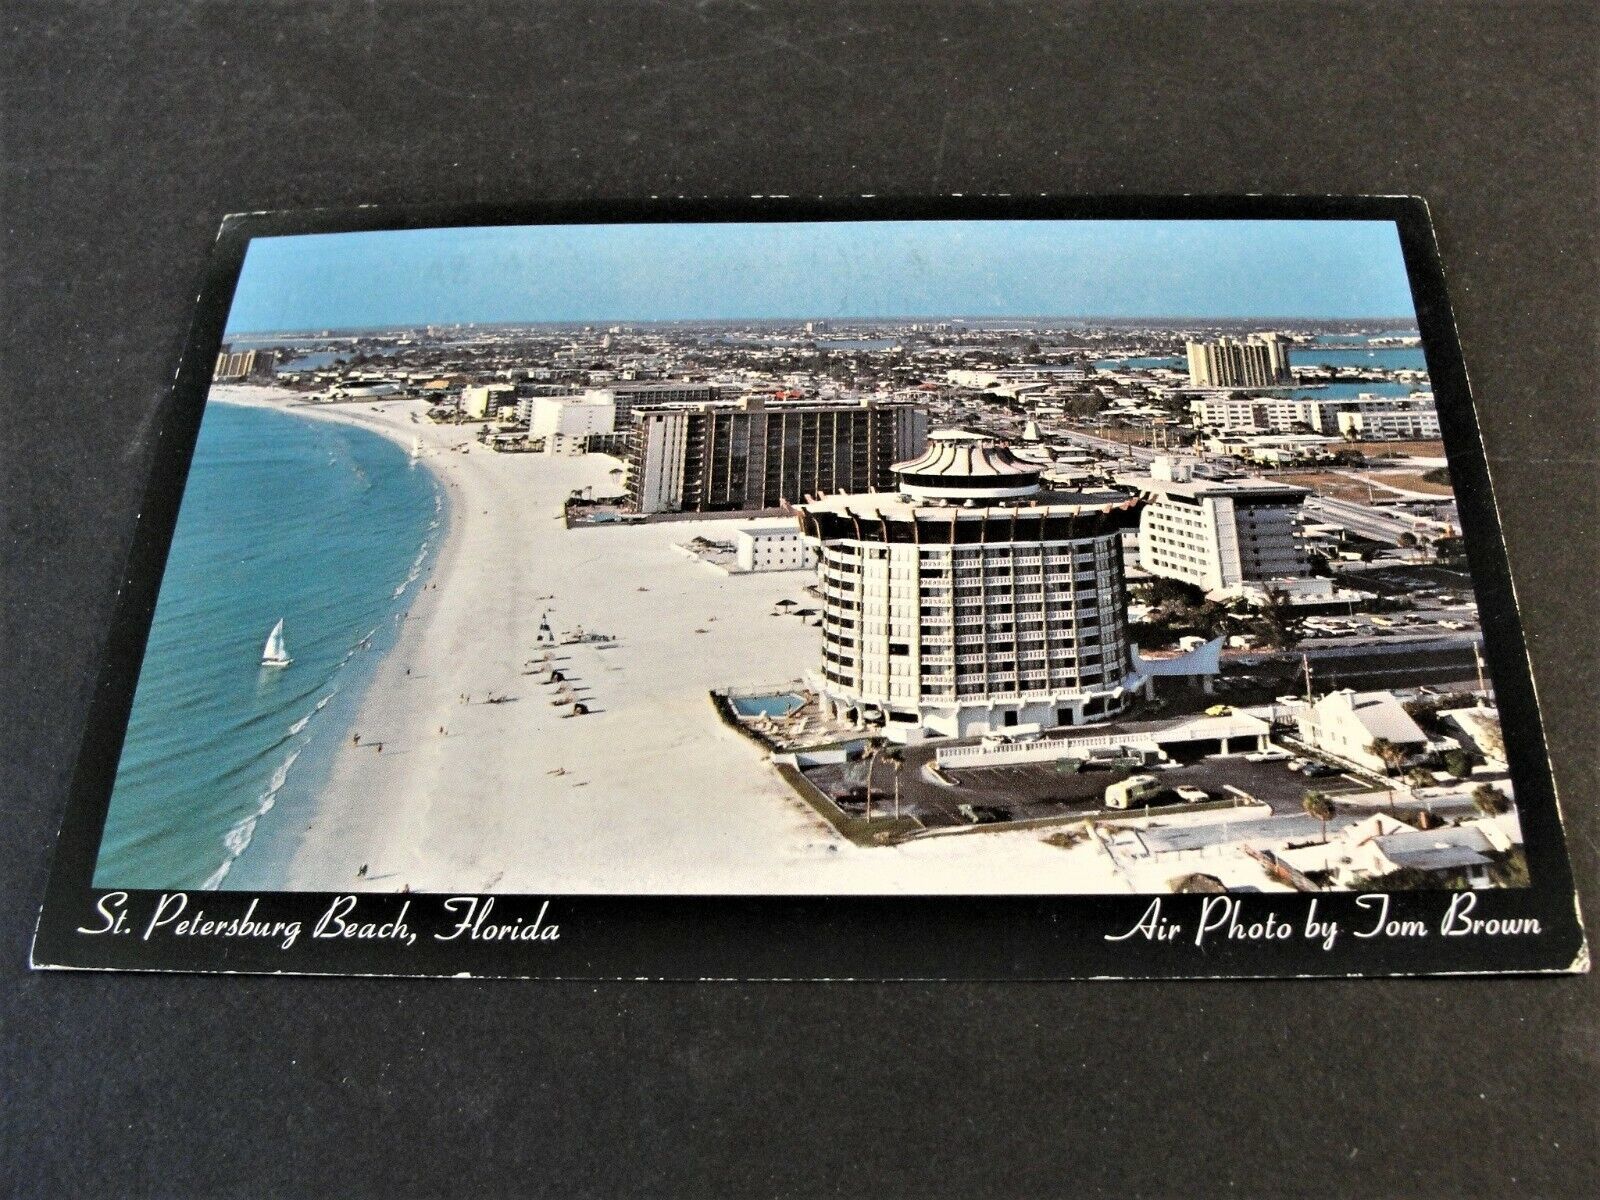 Primary image for St. Petersburg Beach, Florida - Air Photo 1985 Postmarked Postcard.